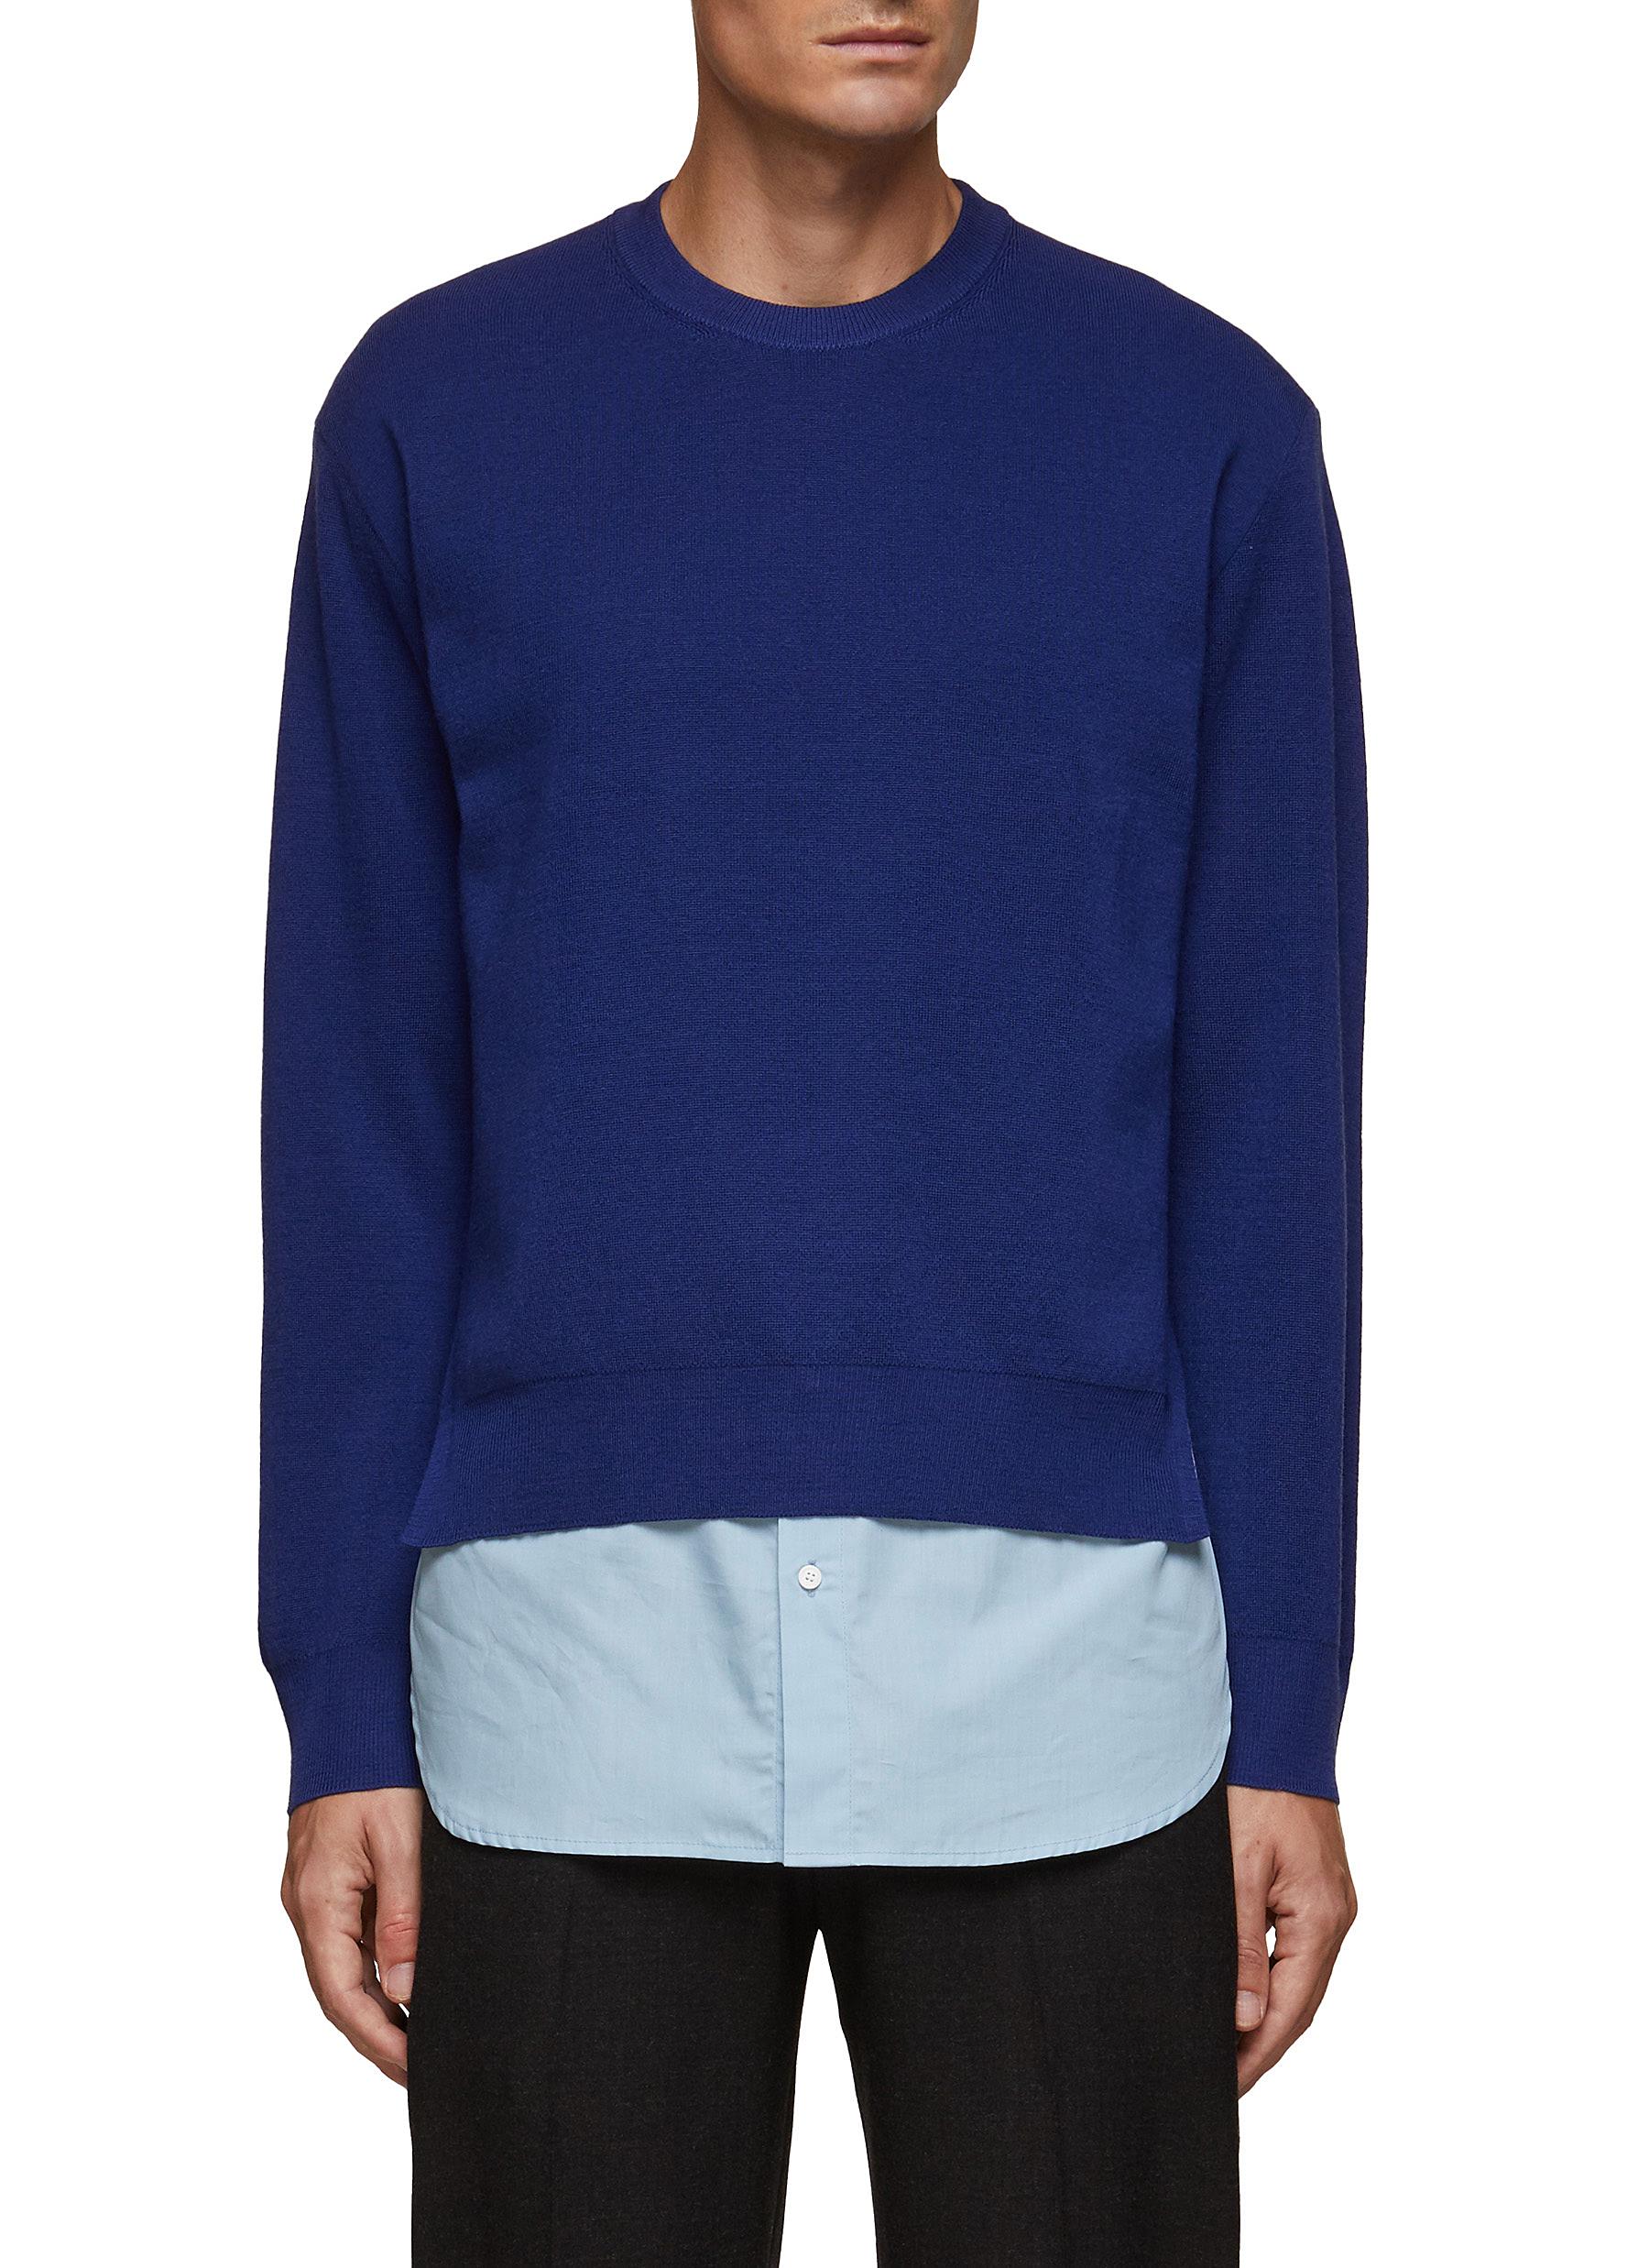 Solid Homme Layered Shirt Crewneck Sweater Top In Blue